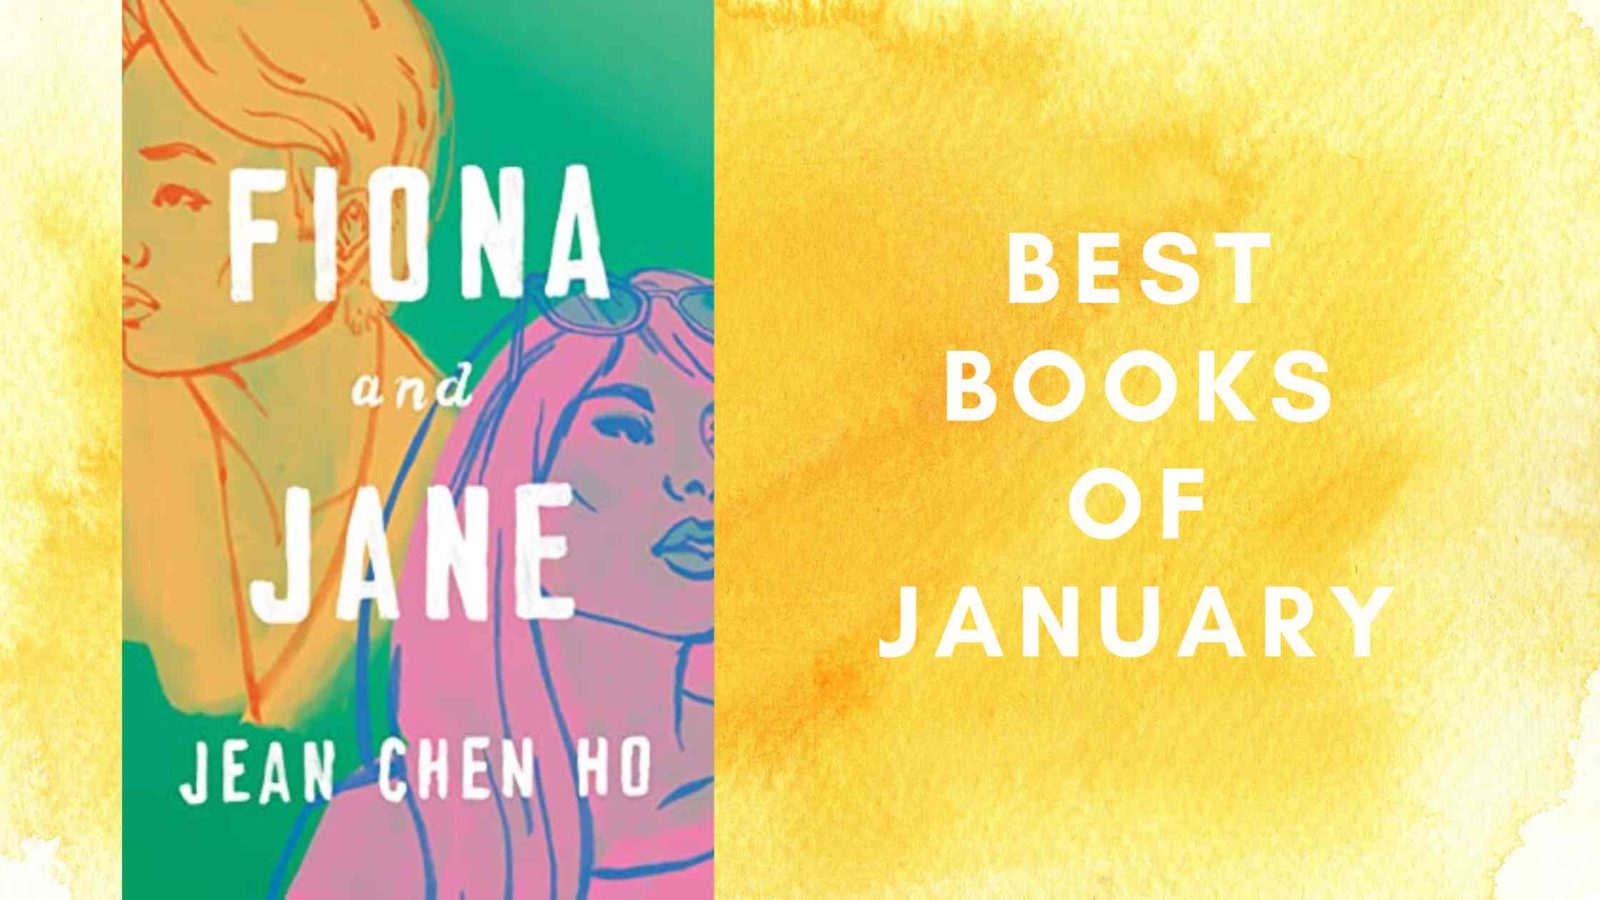 The most anticipated book of January includes Fiona and Jane.